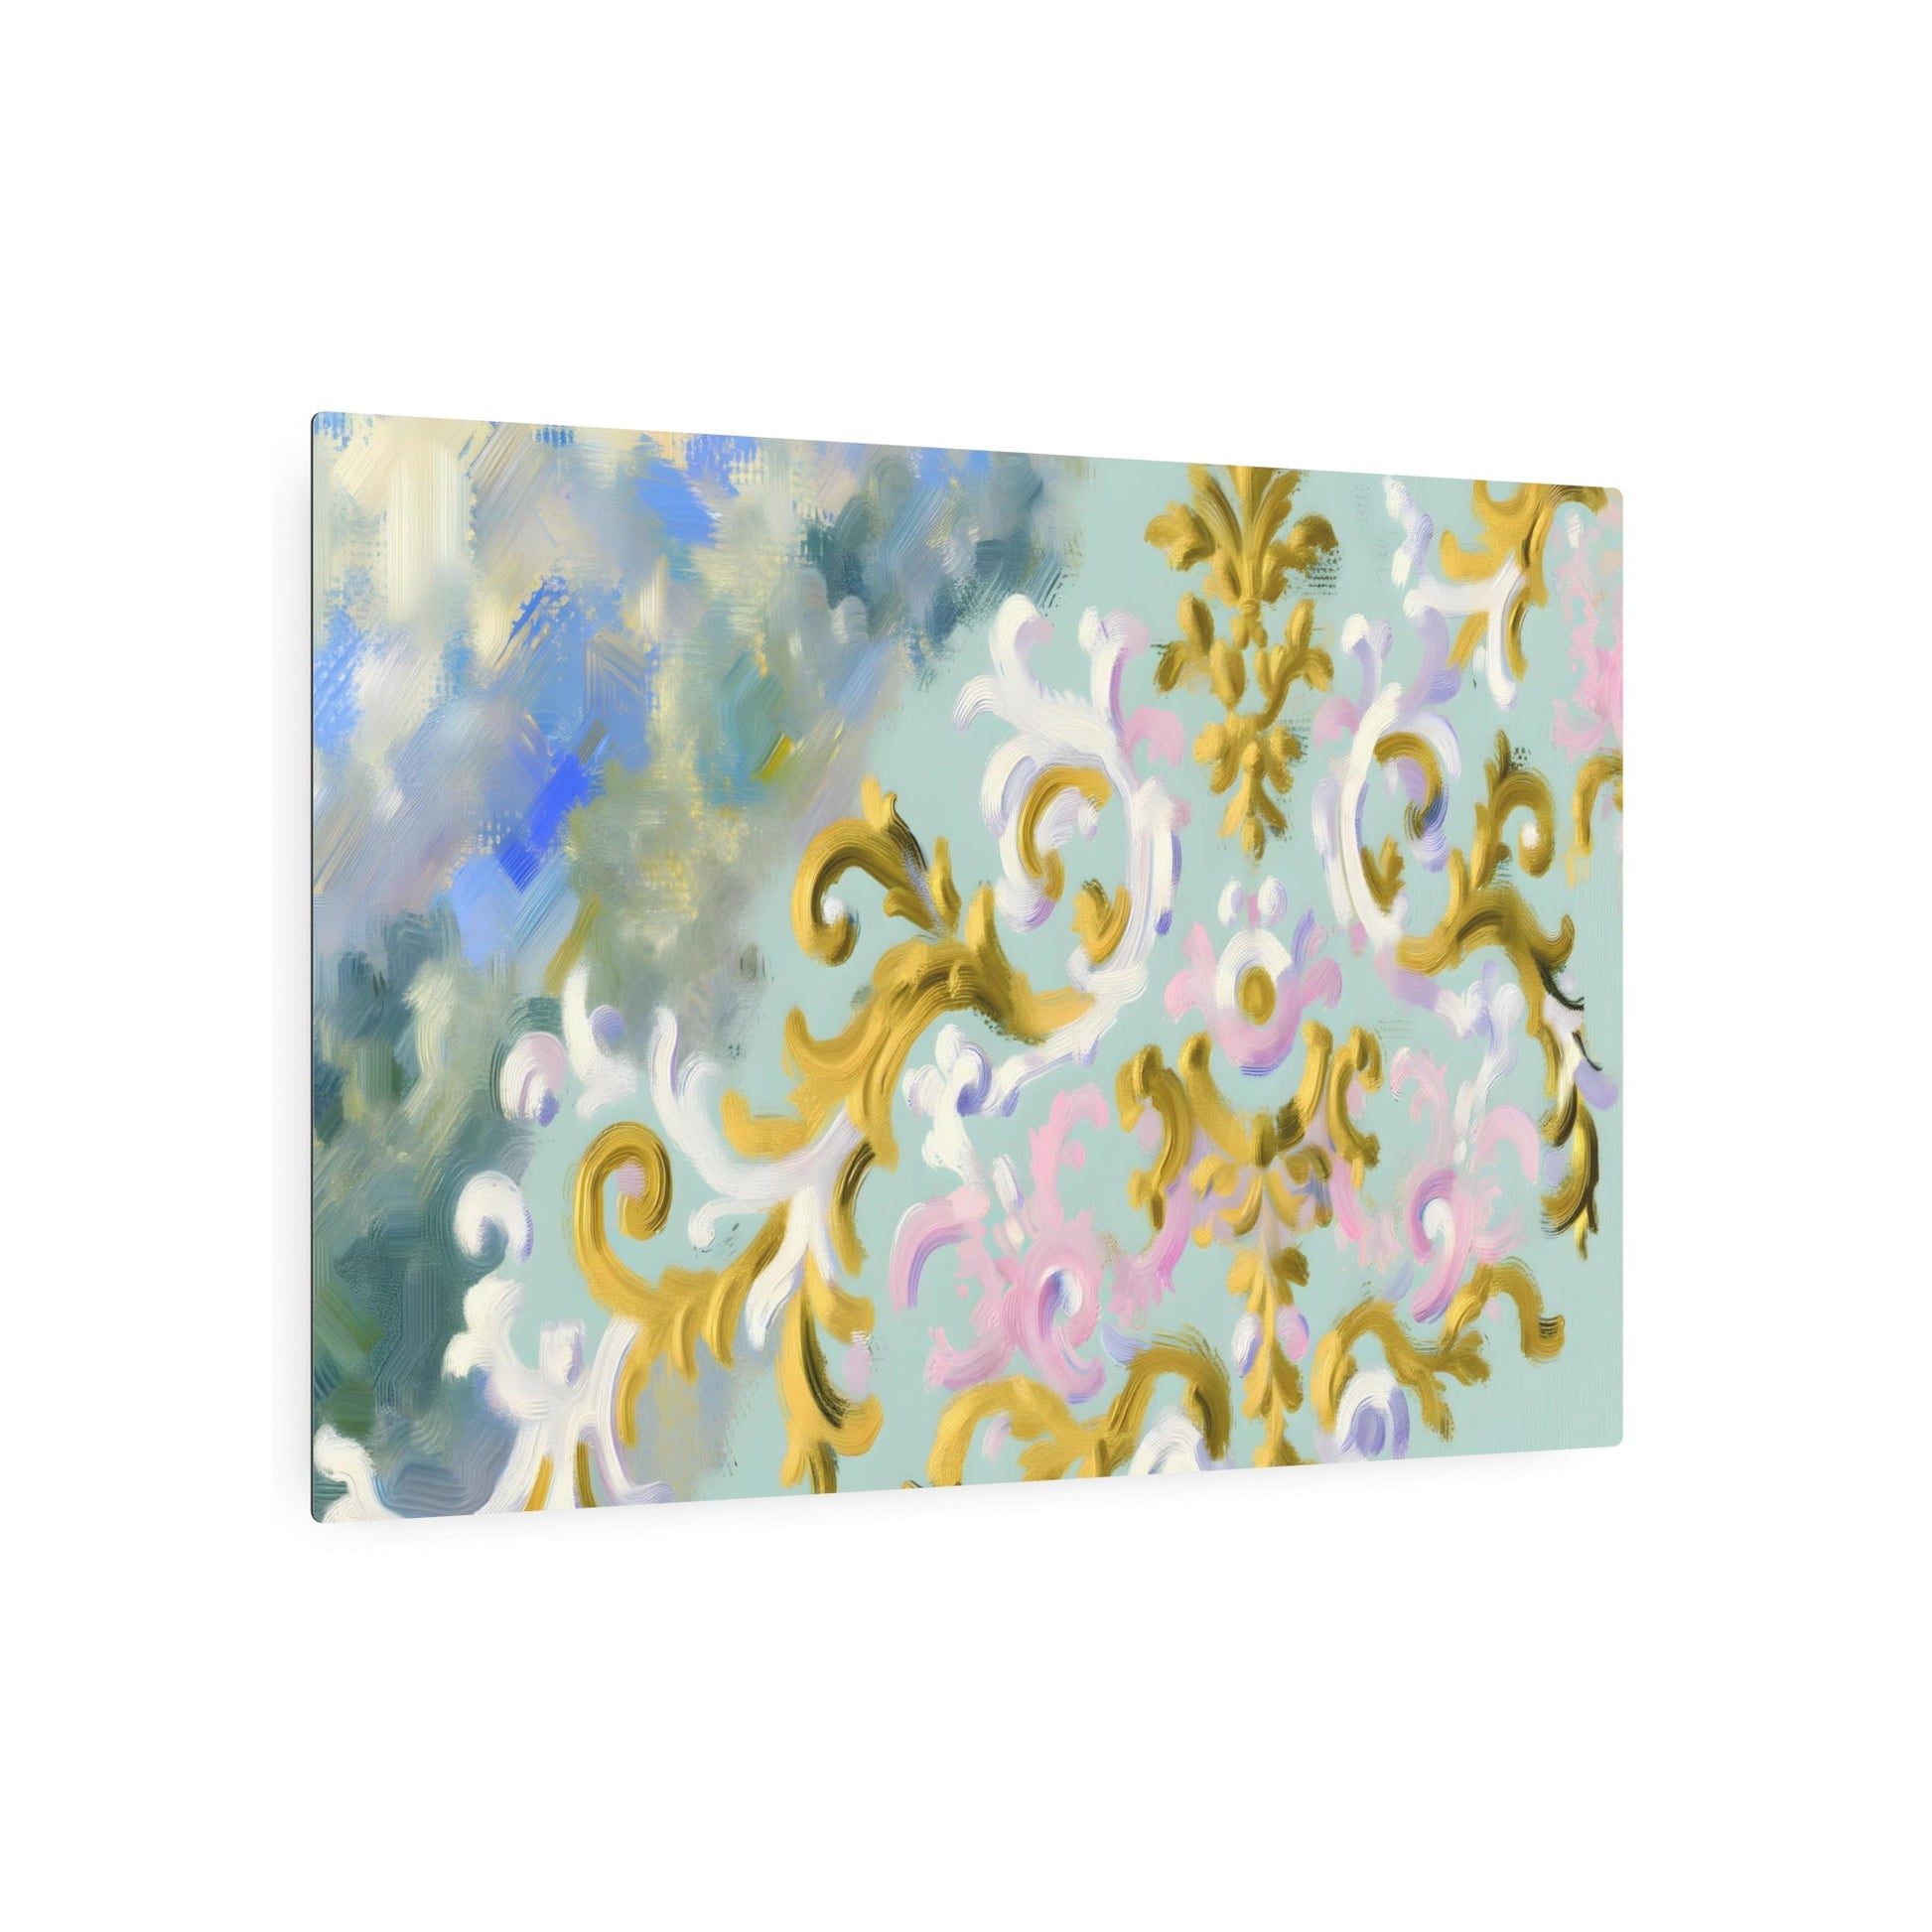 Metal Poster Art | "Rococo Inspired Artwork Featuring Pastel Colors & Gold Accents - Western Art Styles Collection, Evoking the Elegance of François B - Metal Poster Art 36″ x 24″ (Horizontal) 0.12''